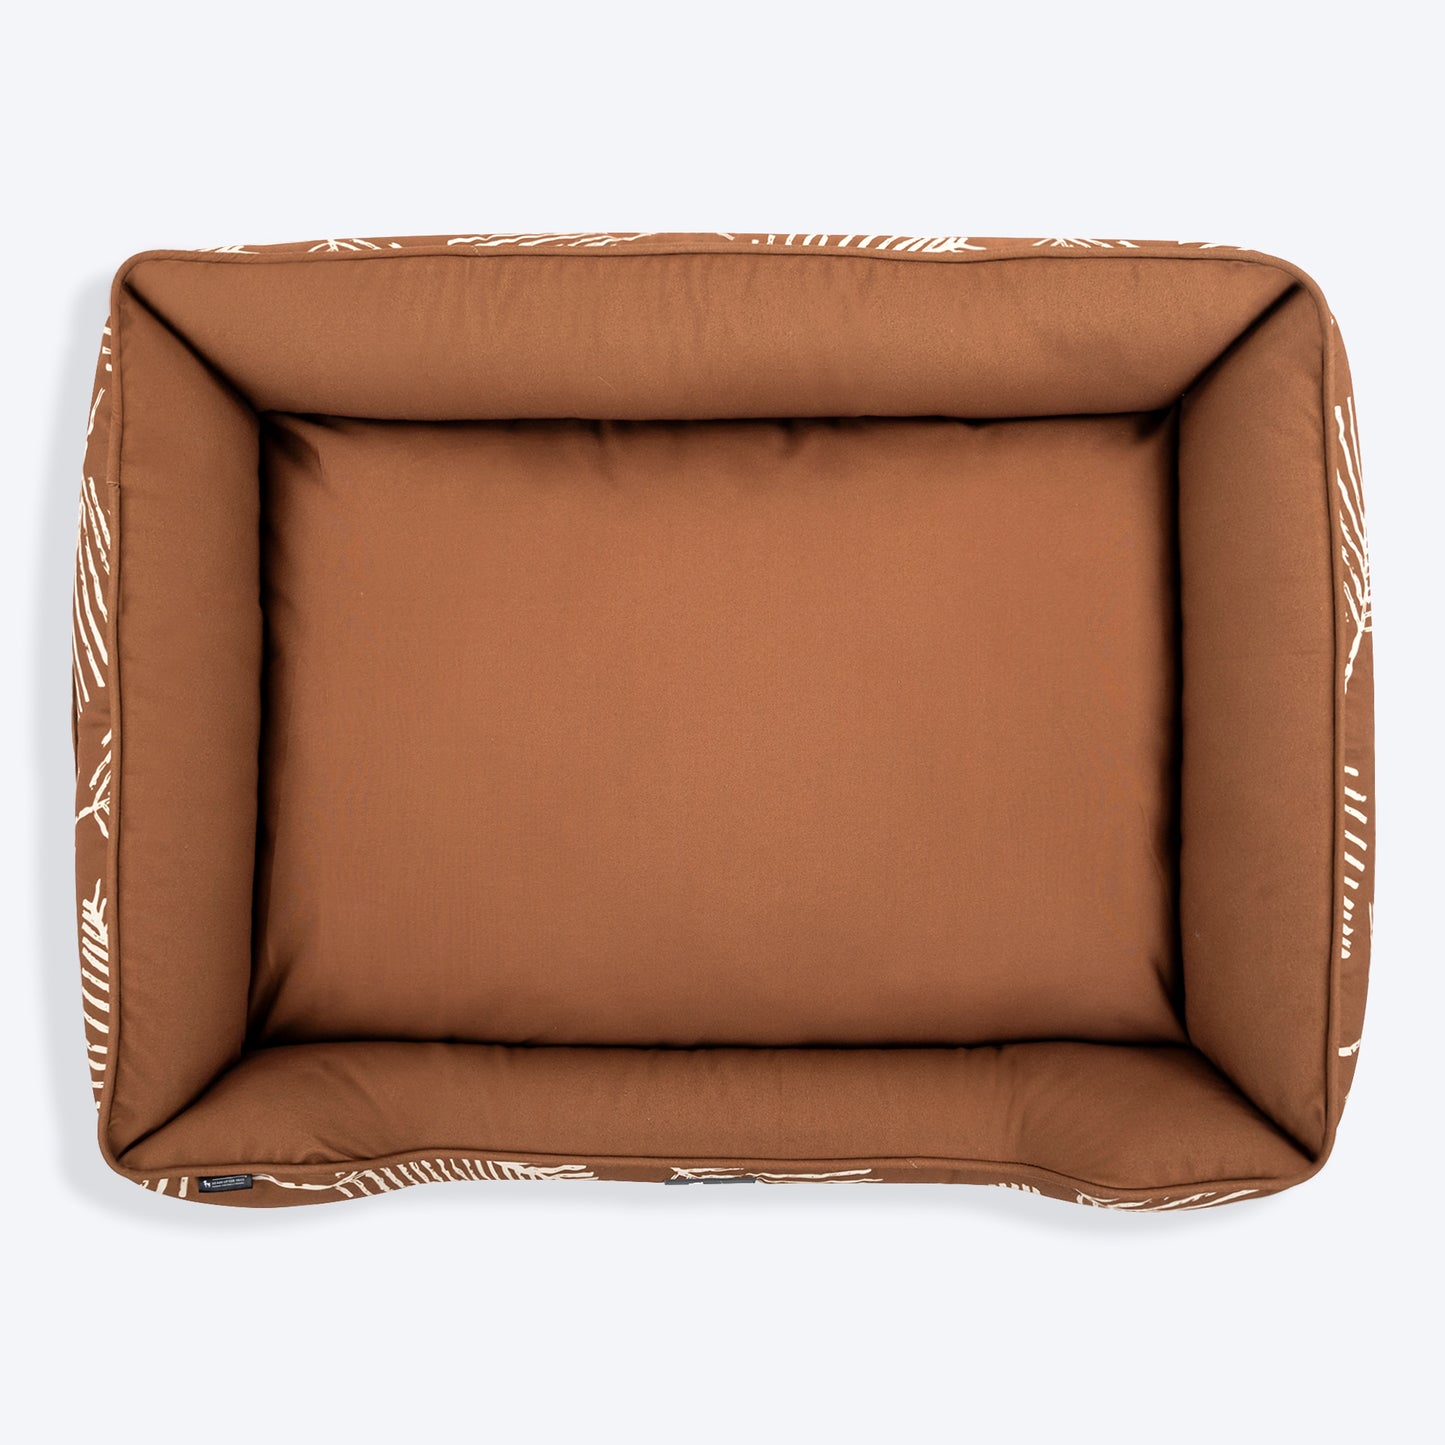 HUFT Tropical Palm Paradise Lounger Dog Bed - Brown -05